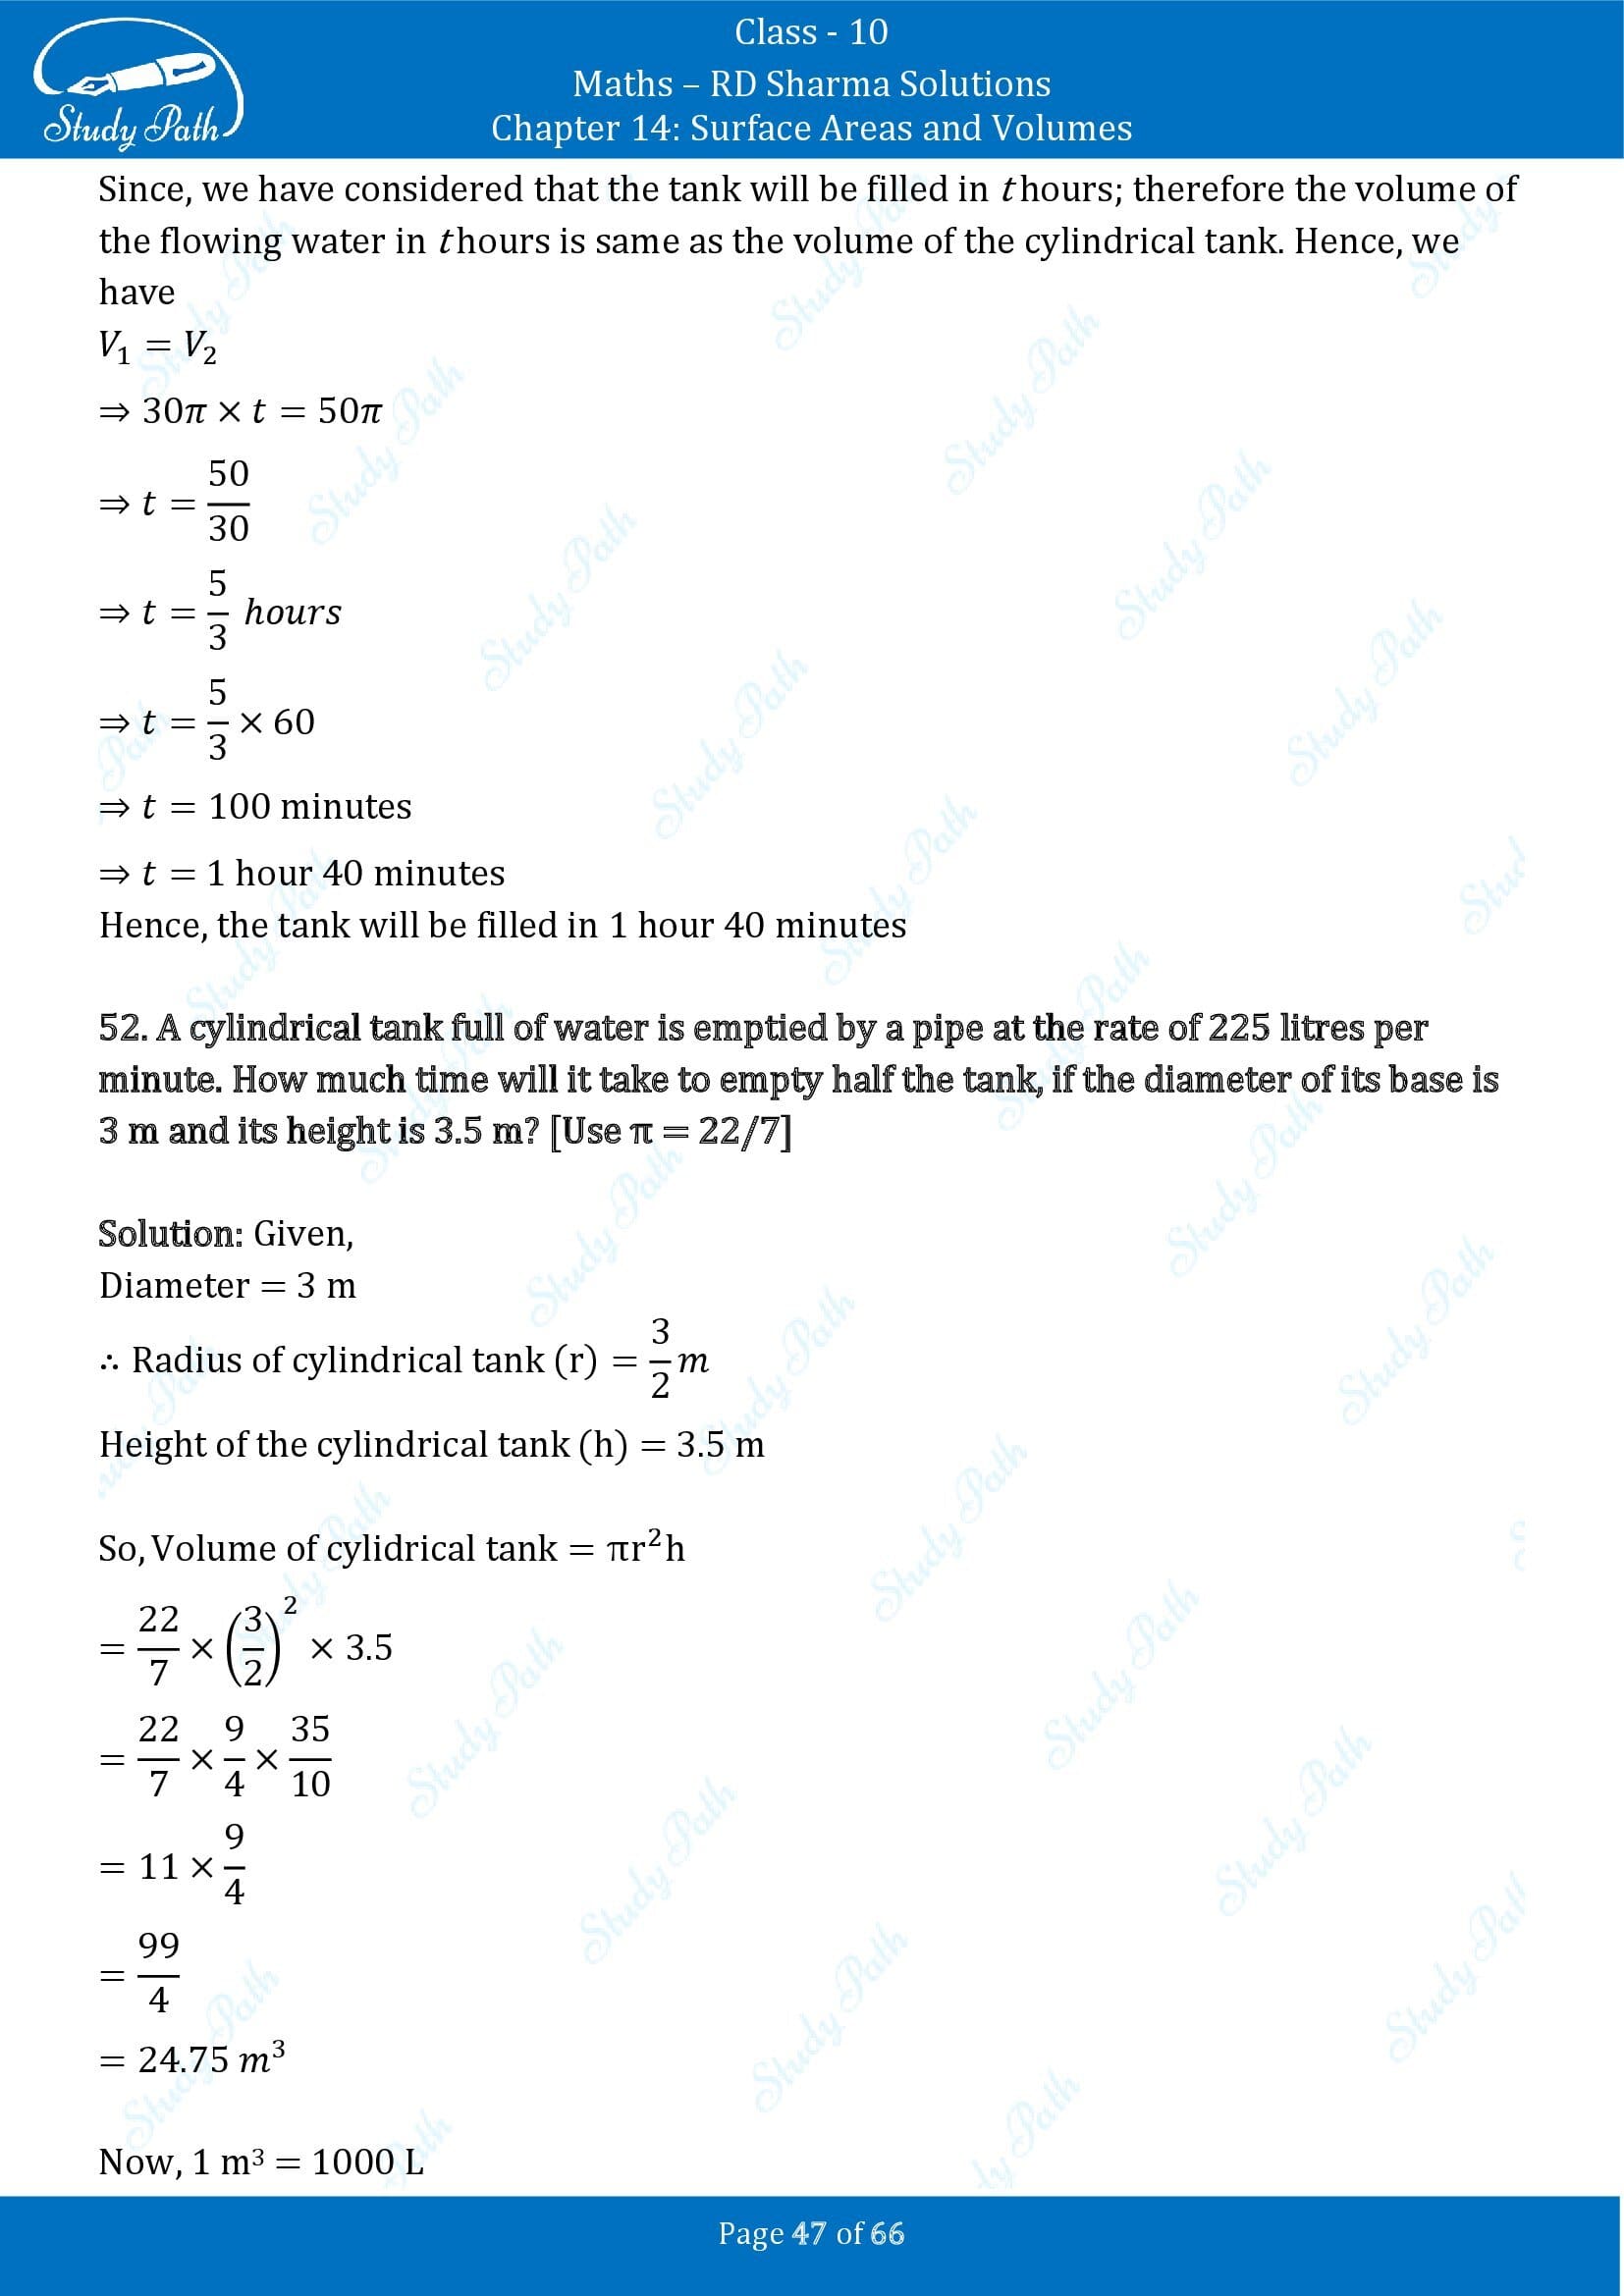 RD Sharma Solutions Class 10 Chapter 14 Surface Areas and Volumes Exercise 14.1 00047